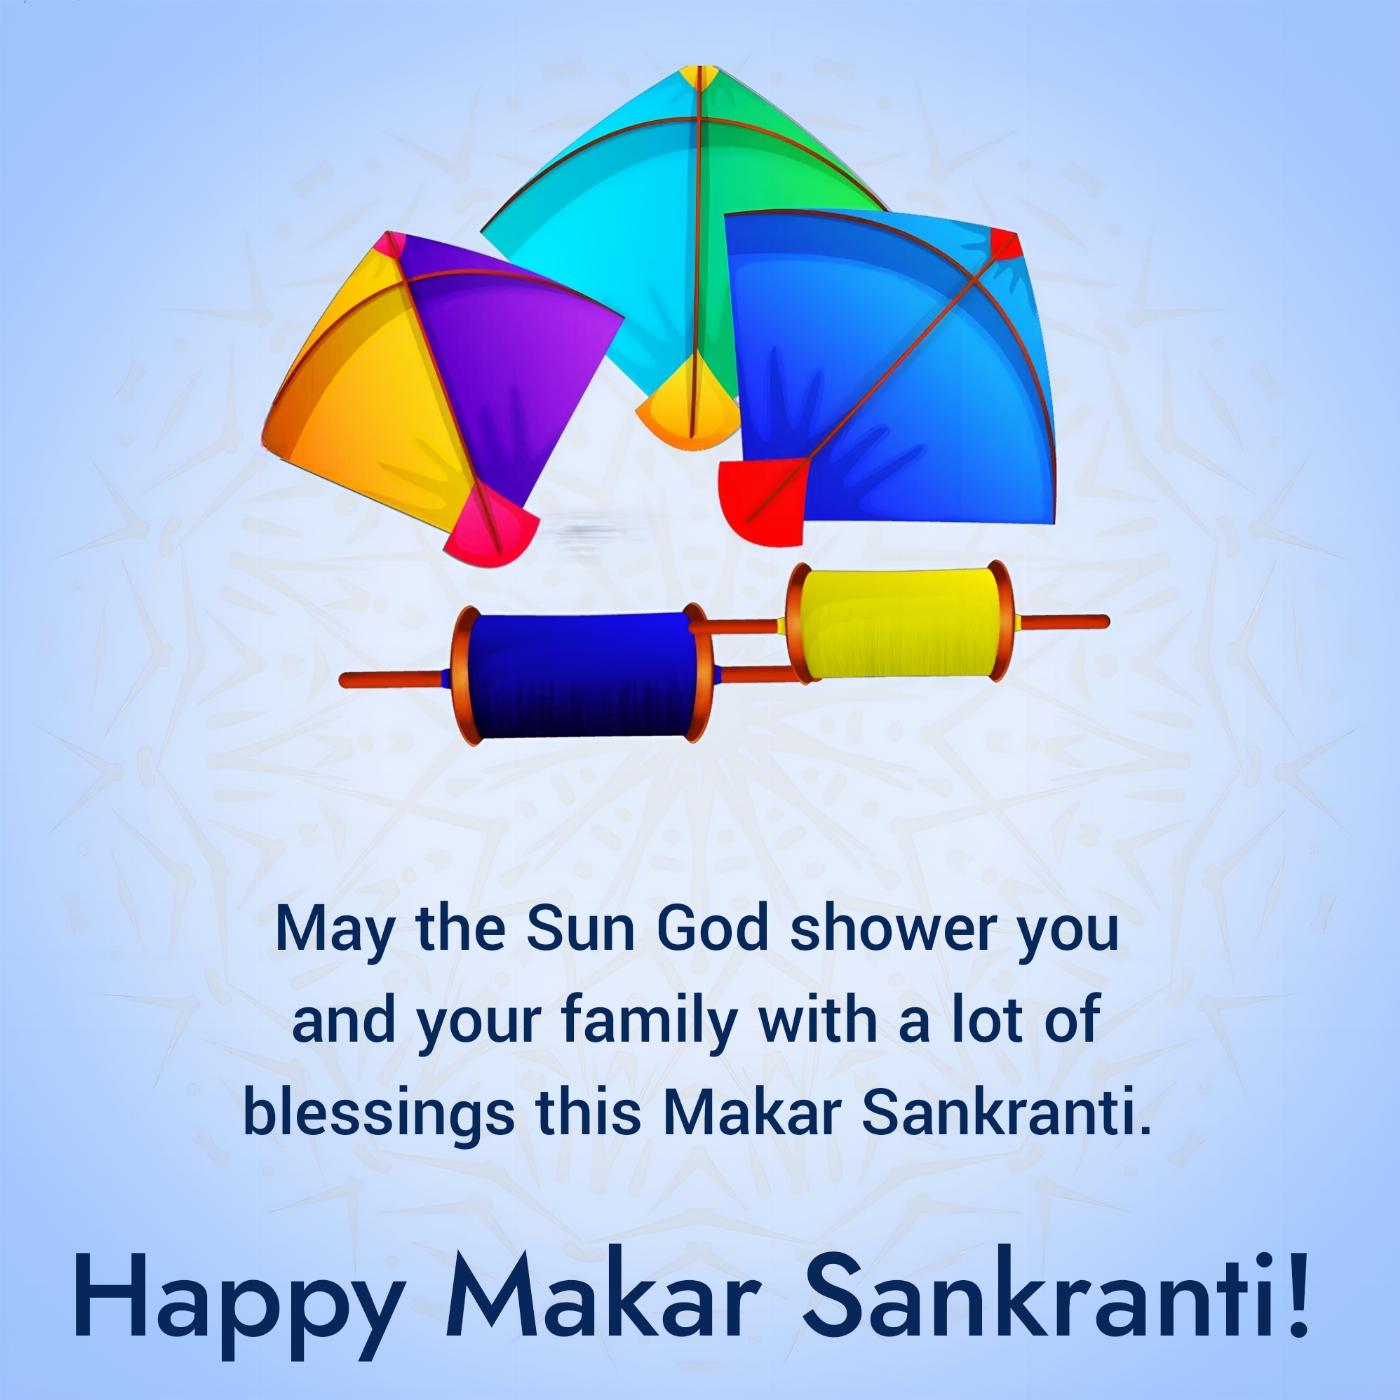 May the Sun God shower you and your family with